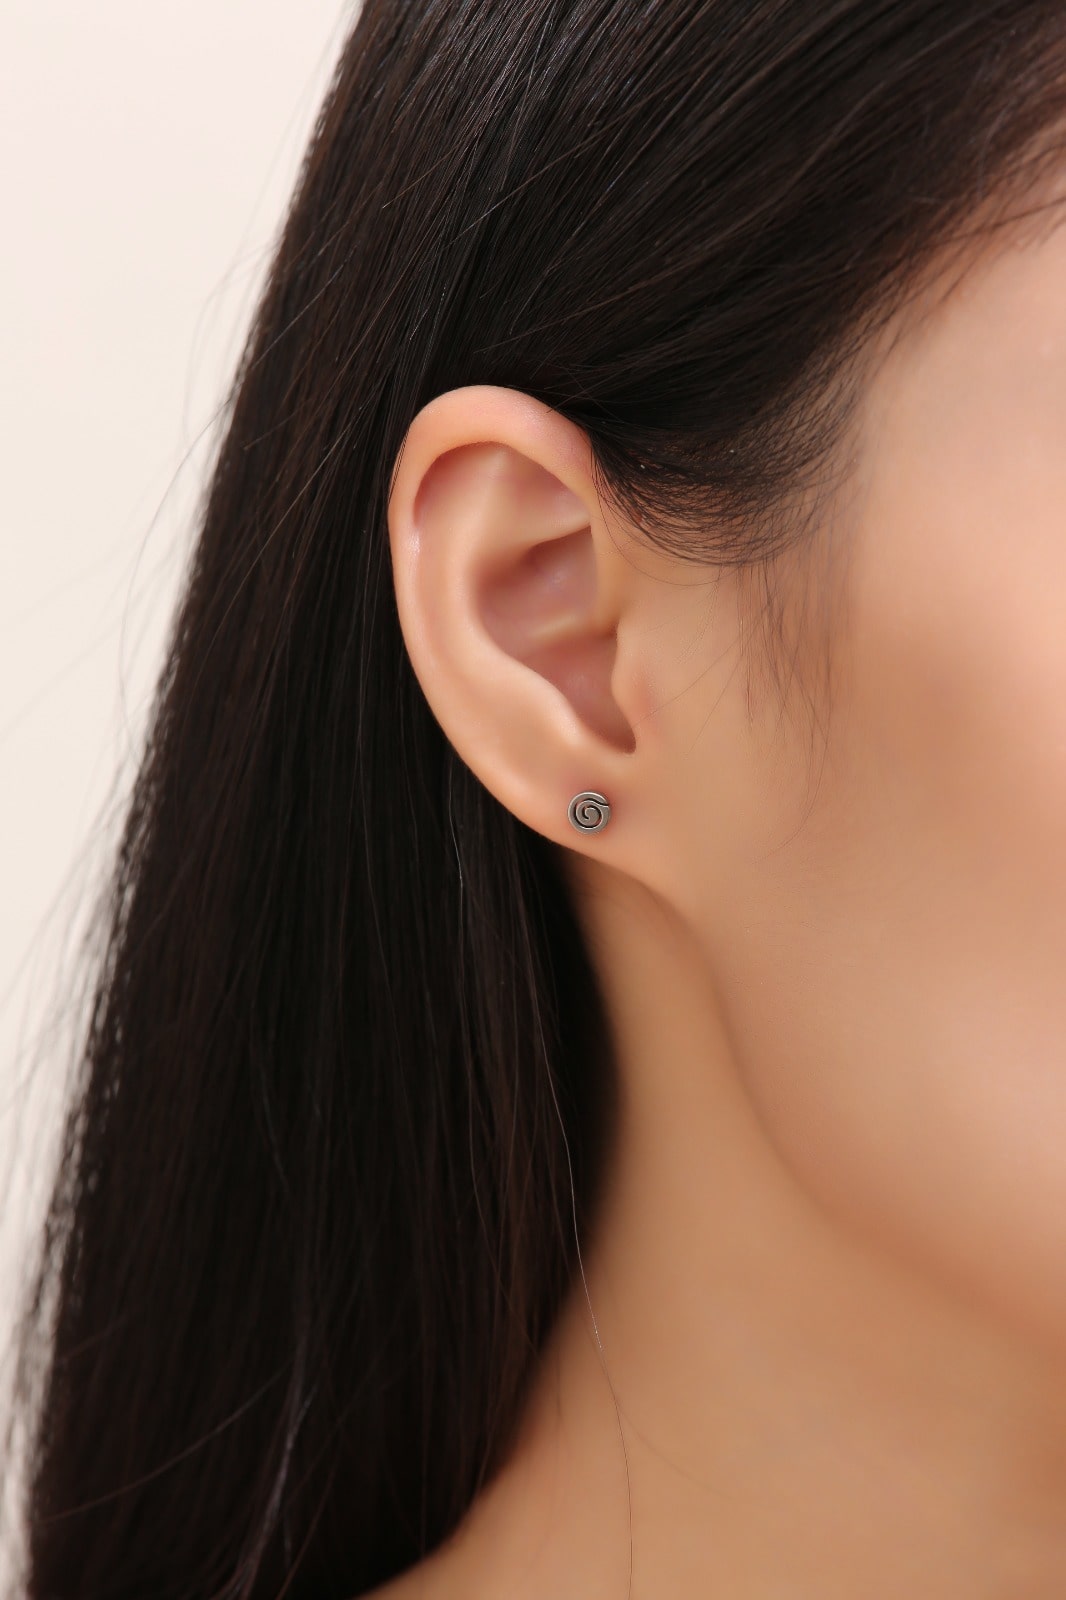 Small Swirl Titanium Studs -solid titanium studs and backs- Feature a small and minimal design on a white woman. +